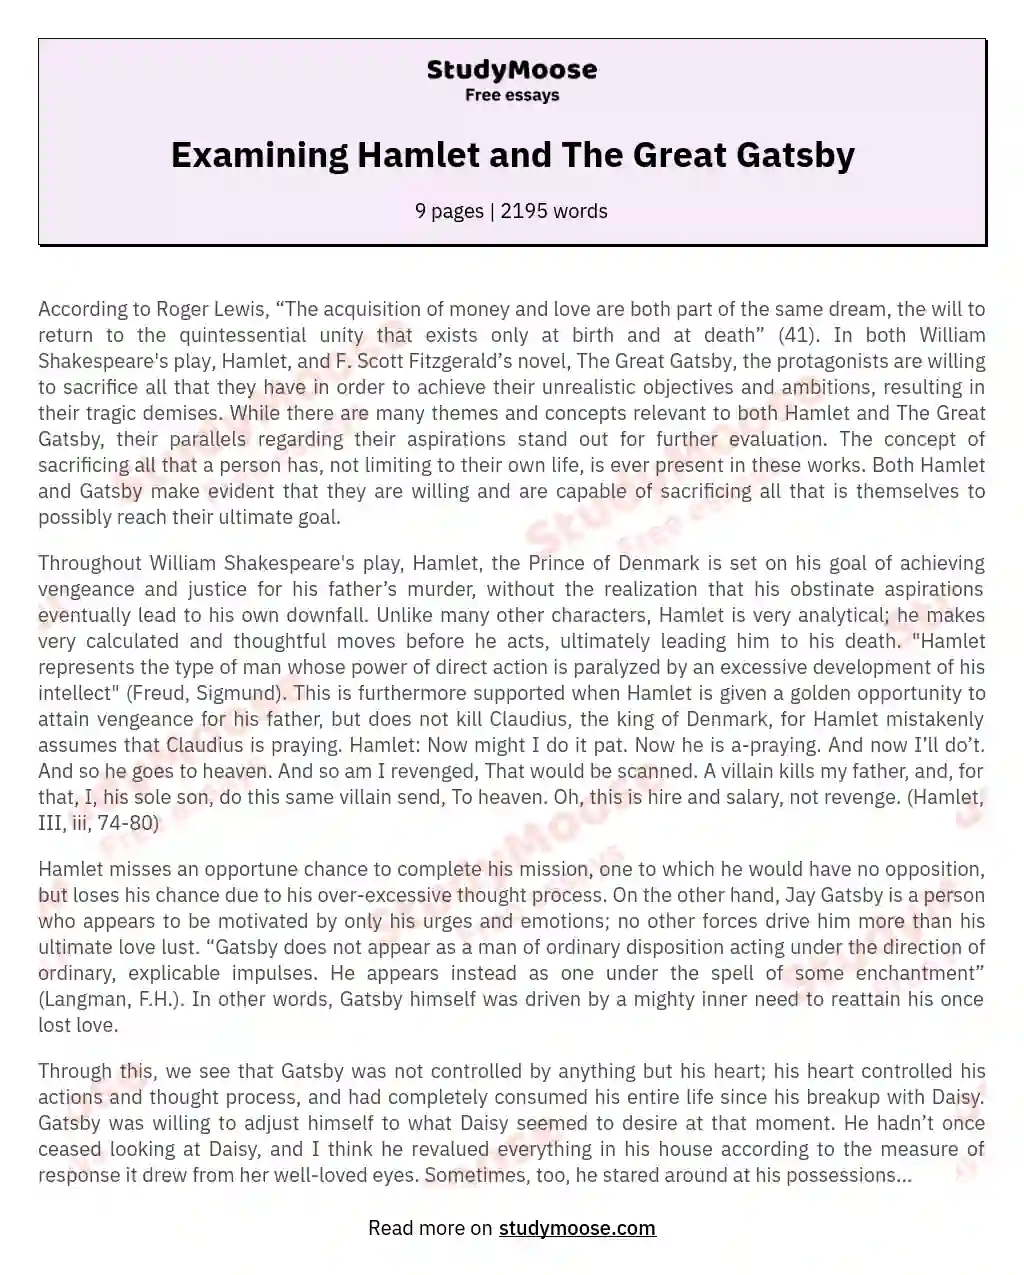 hamlet and the great gatsby comparison essay